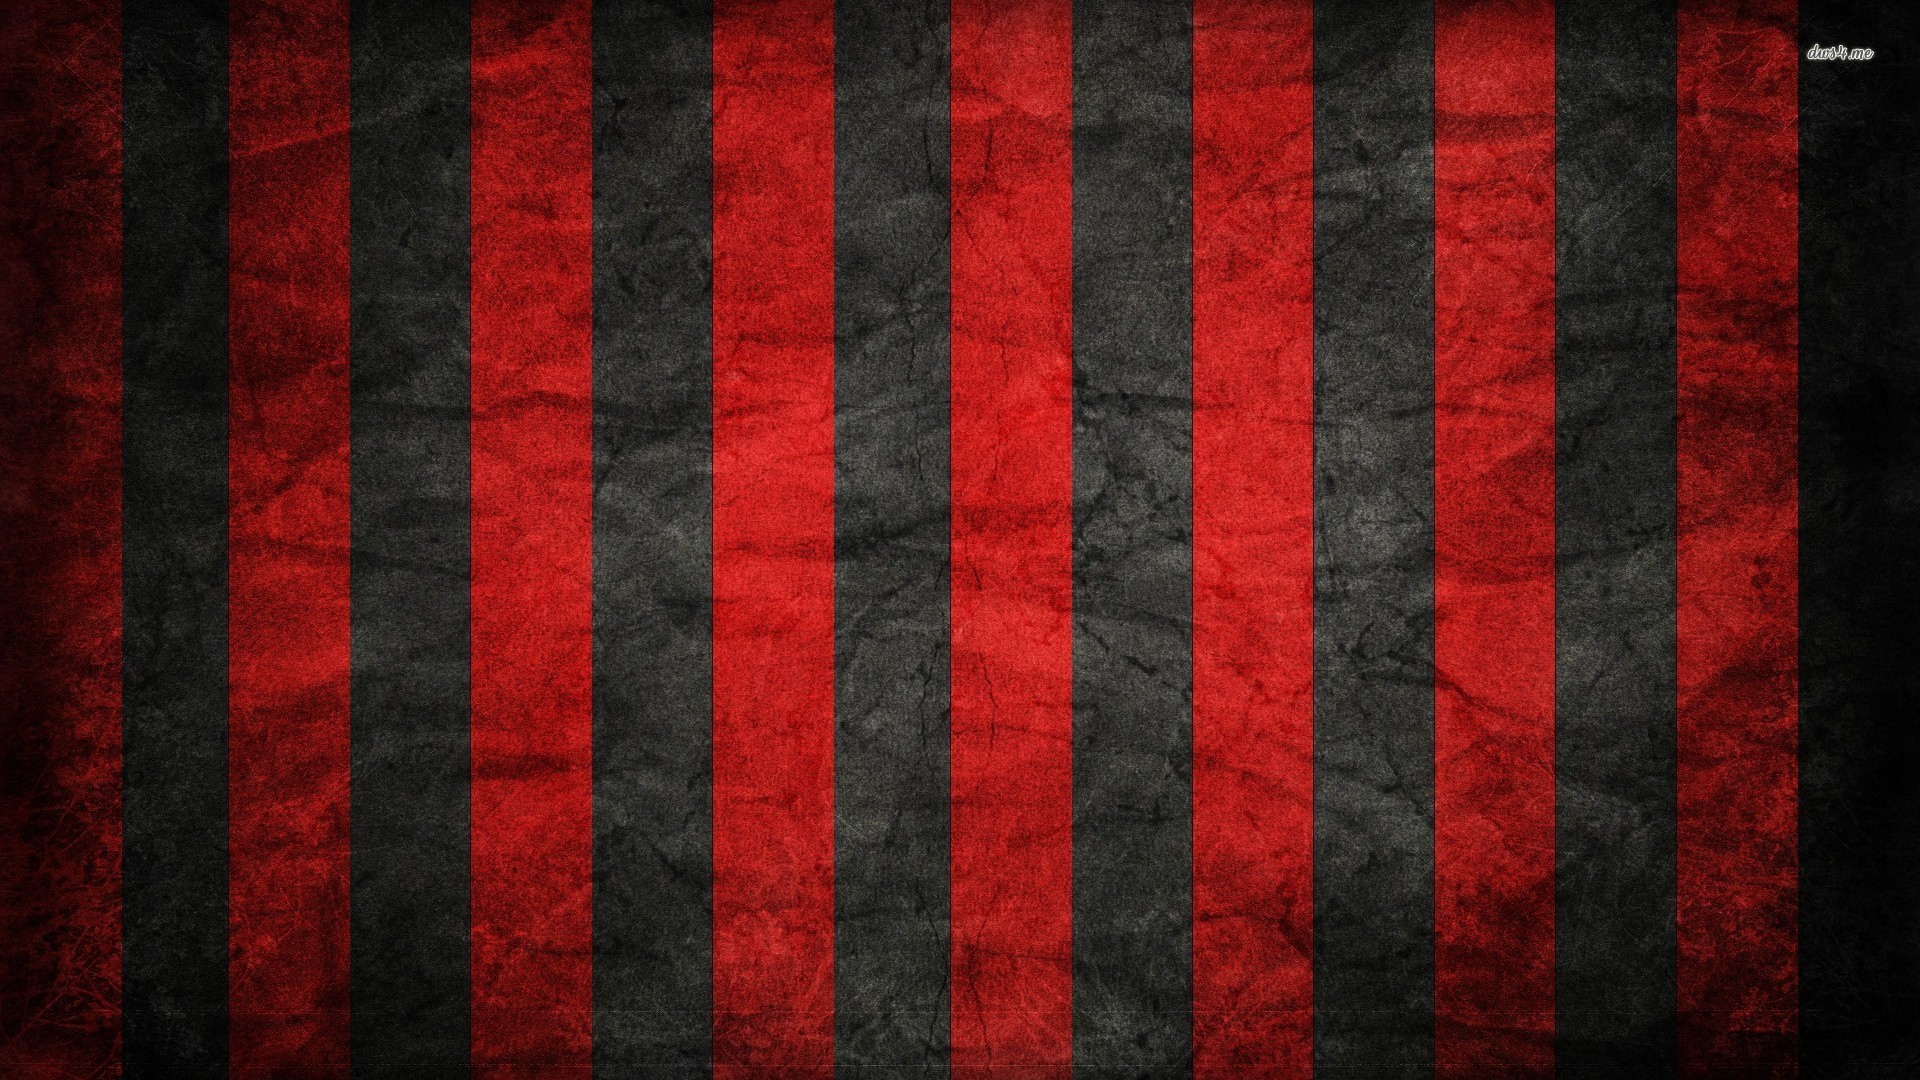 1920x1080 Black and red stripes wallpaper - Abstract wallpapers - #11251